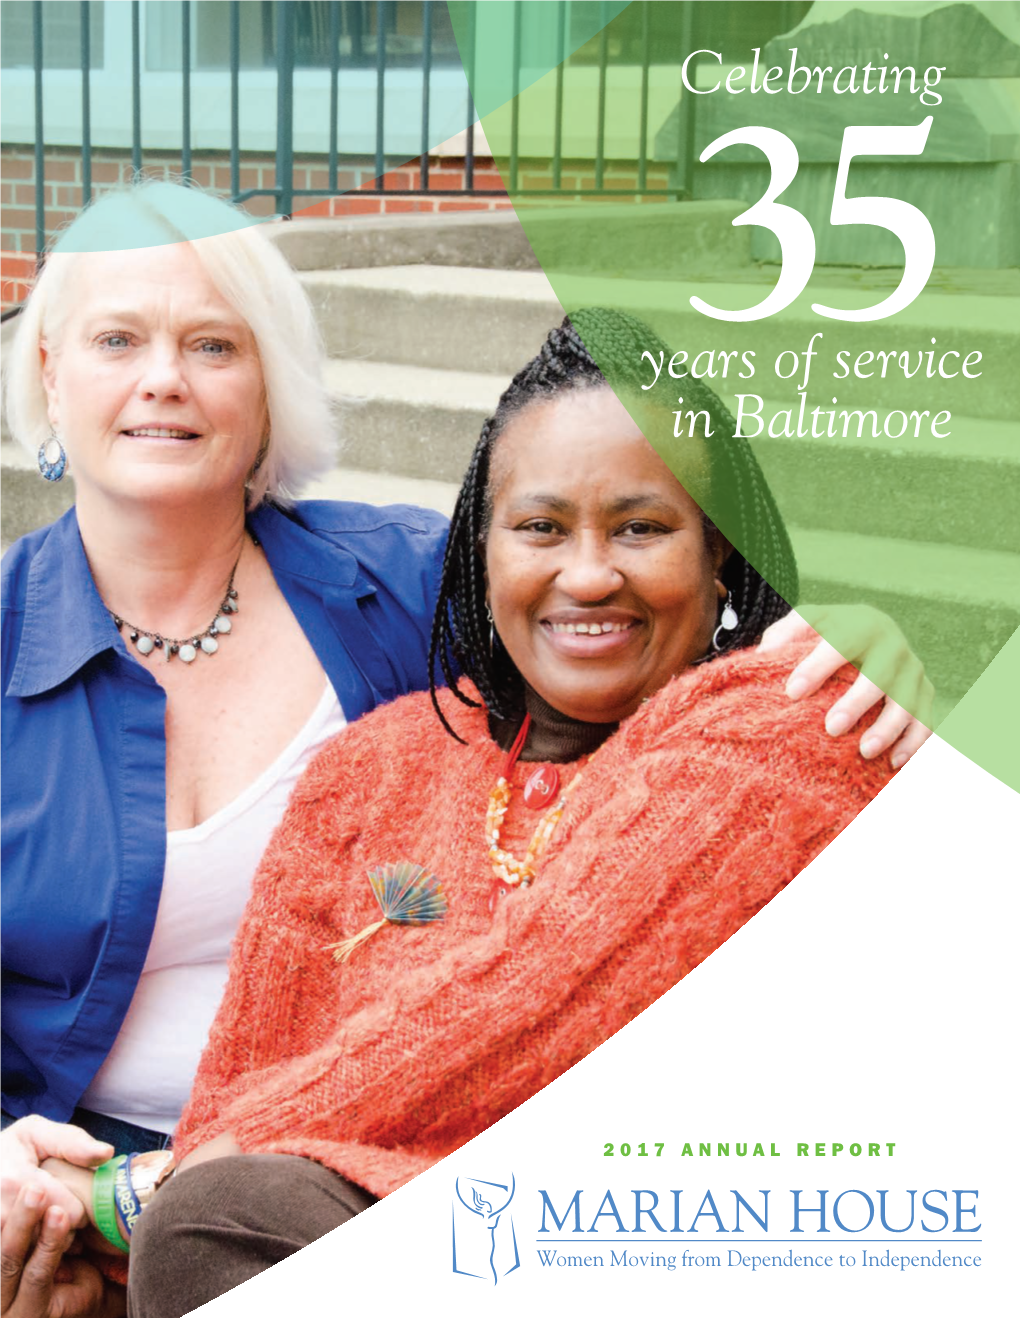 Celebrating 35 Years of Service in Baltimore